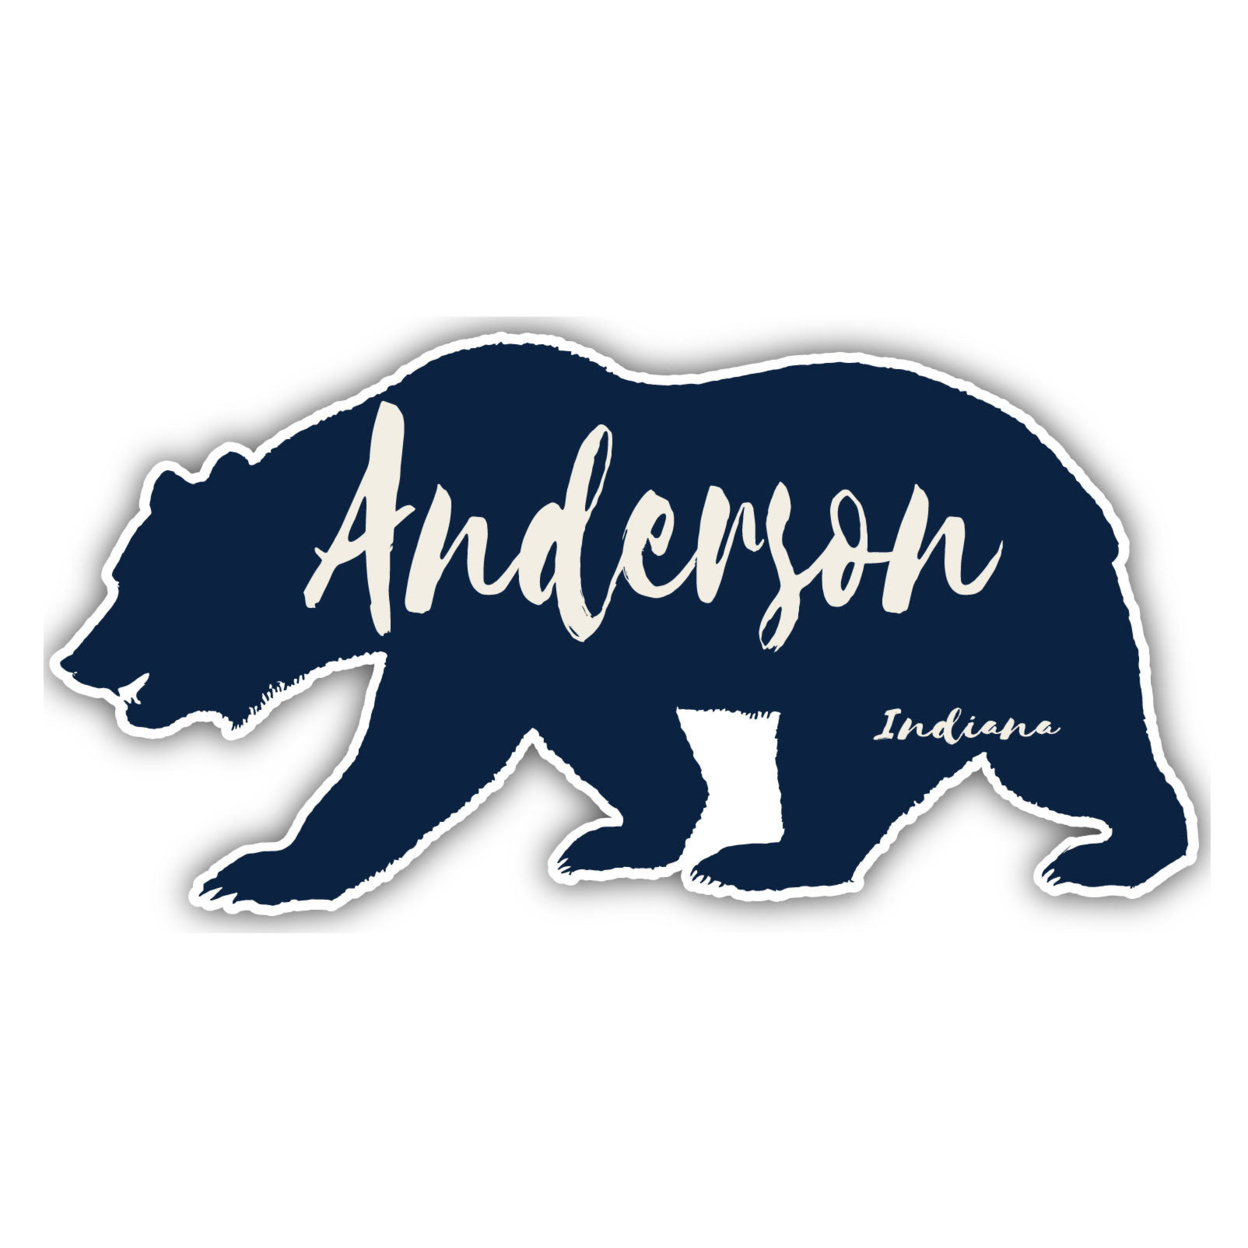 Anderson Indiana Souvenir Decorative Stickers (Choose Theme And Size) - Single Unit, 2-Inch, Bear